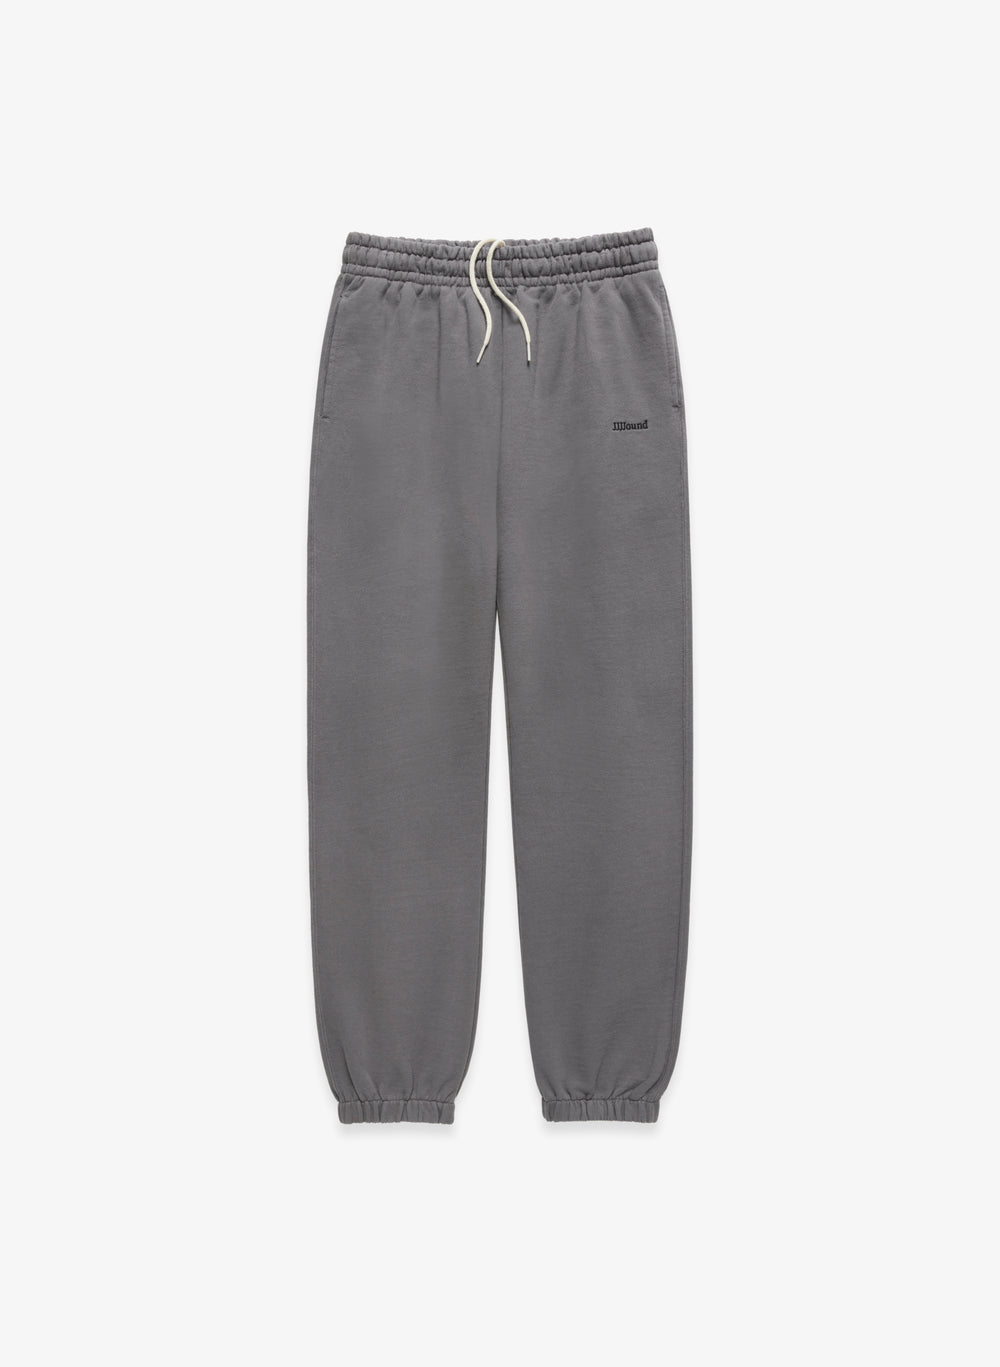 J90 Sweatpants - Charcoal French Terry